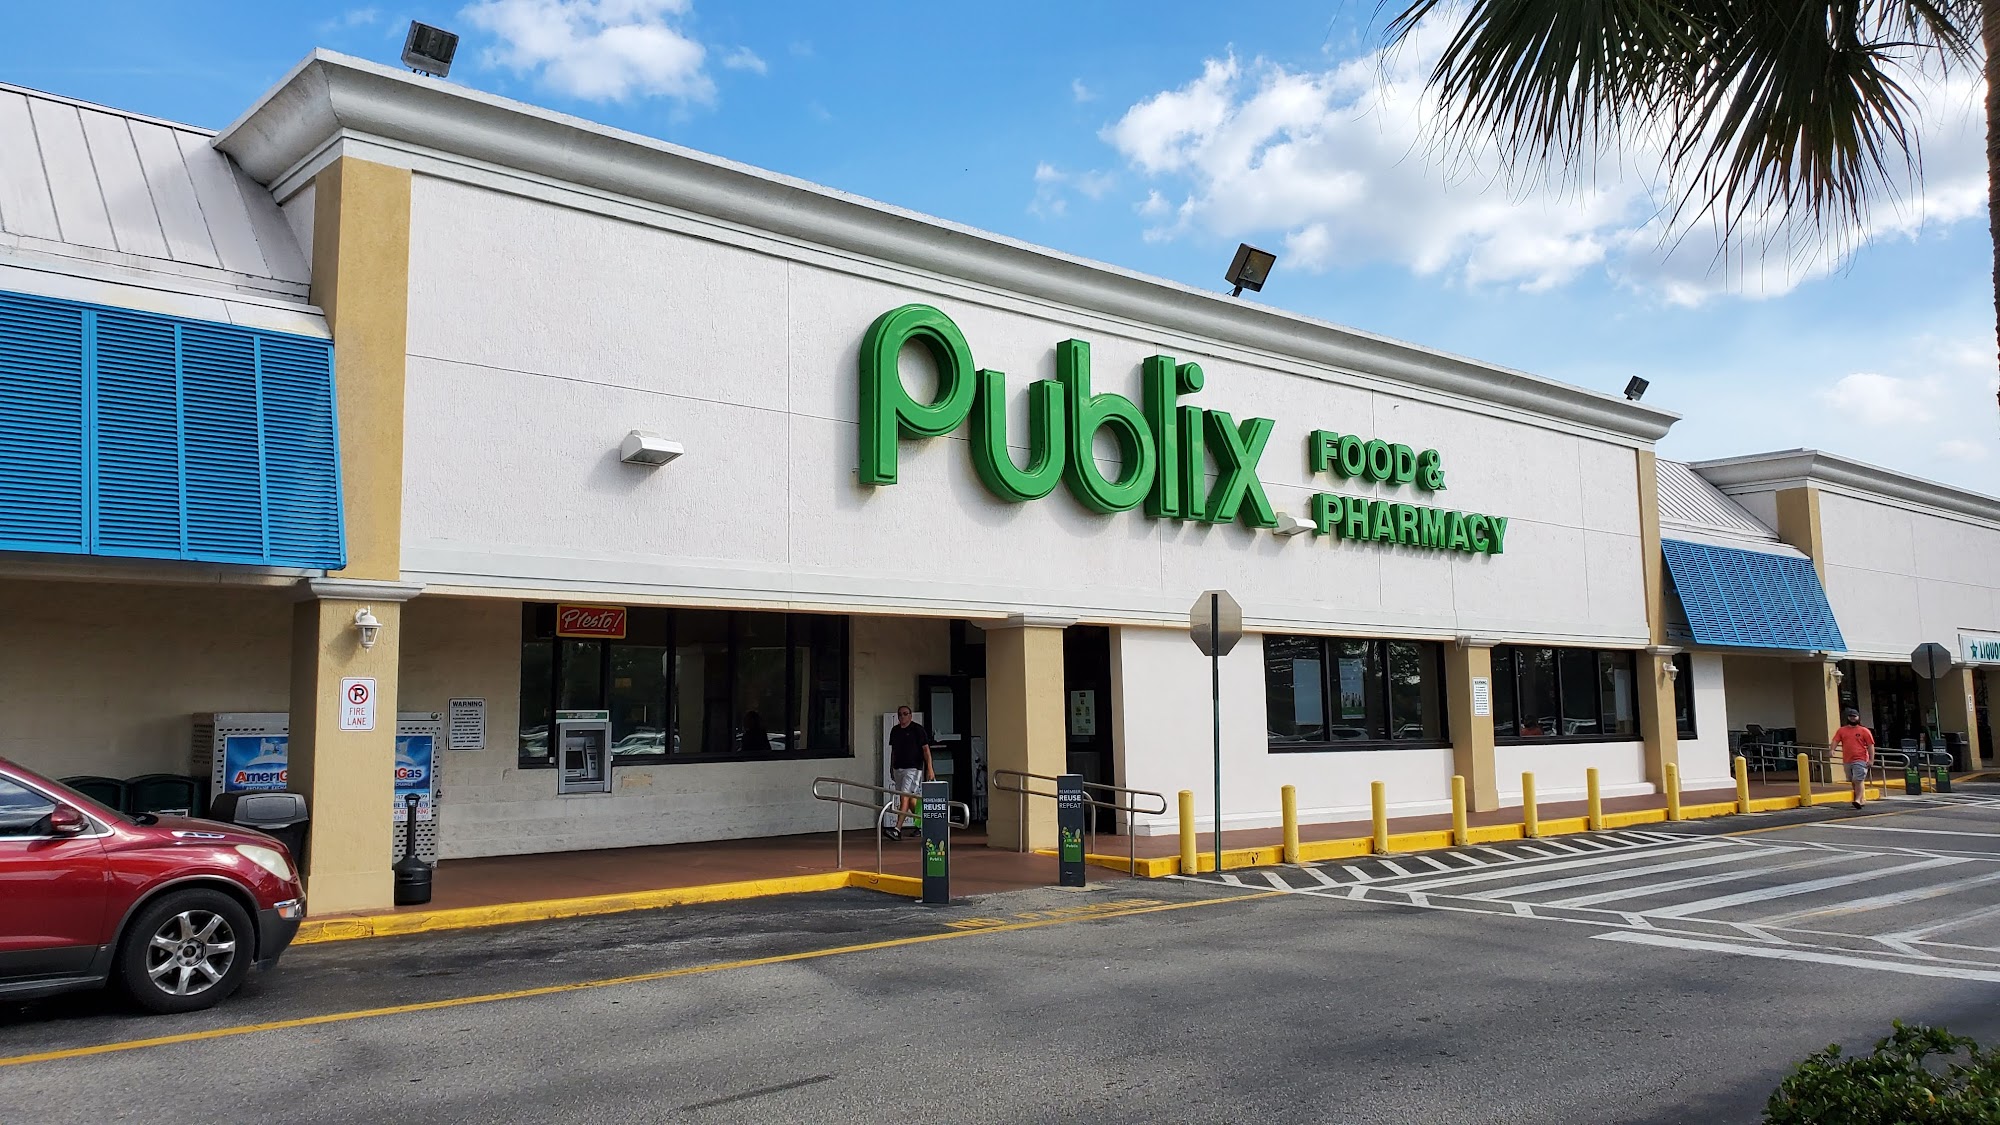 Publix Pharmacy at Cove Shopping Center